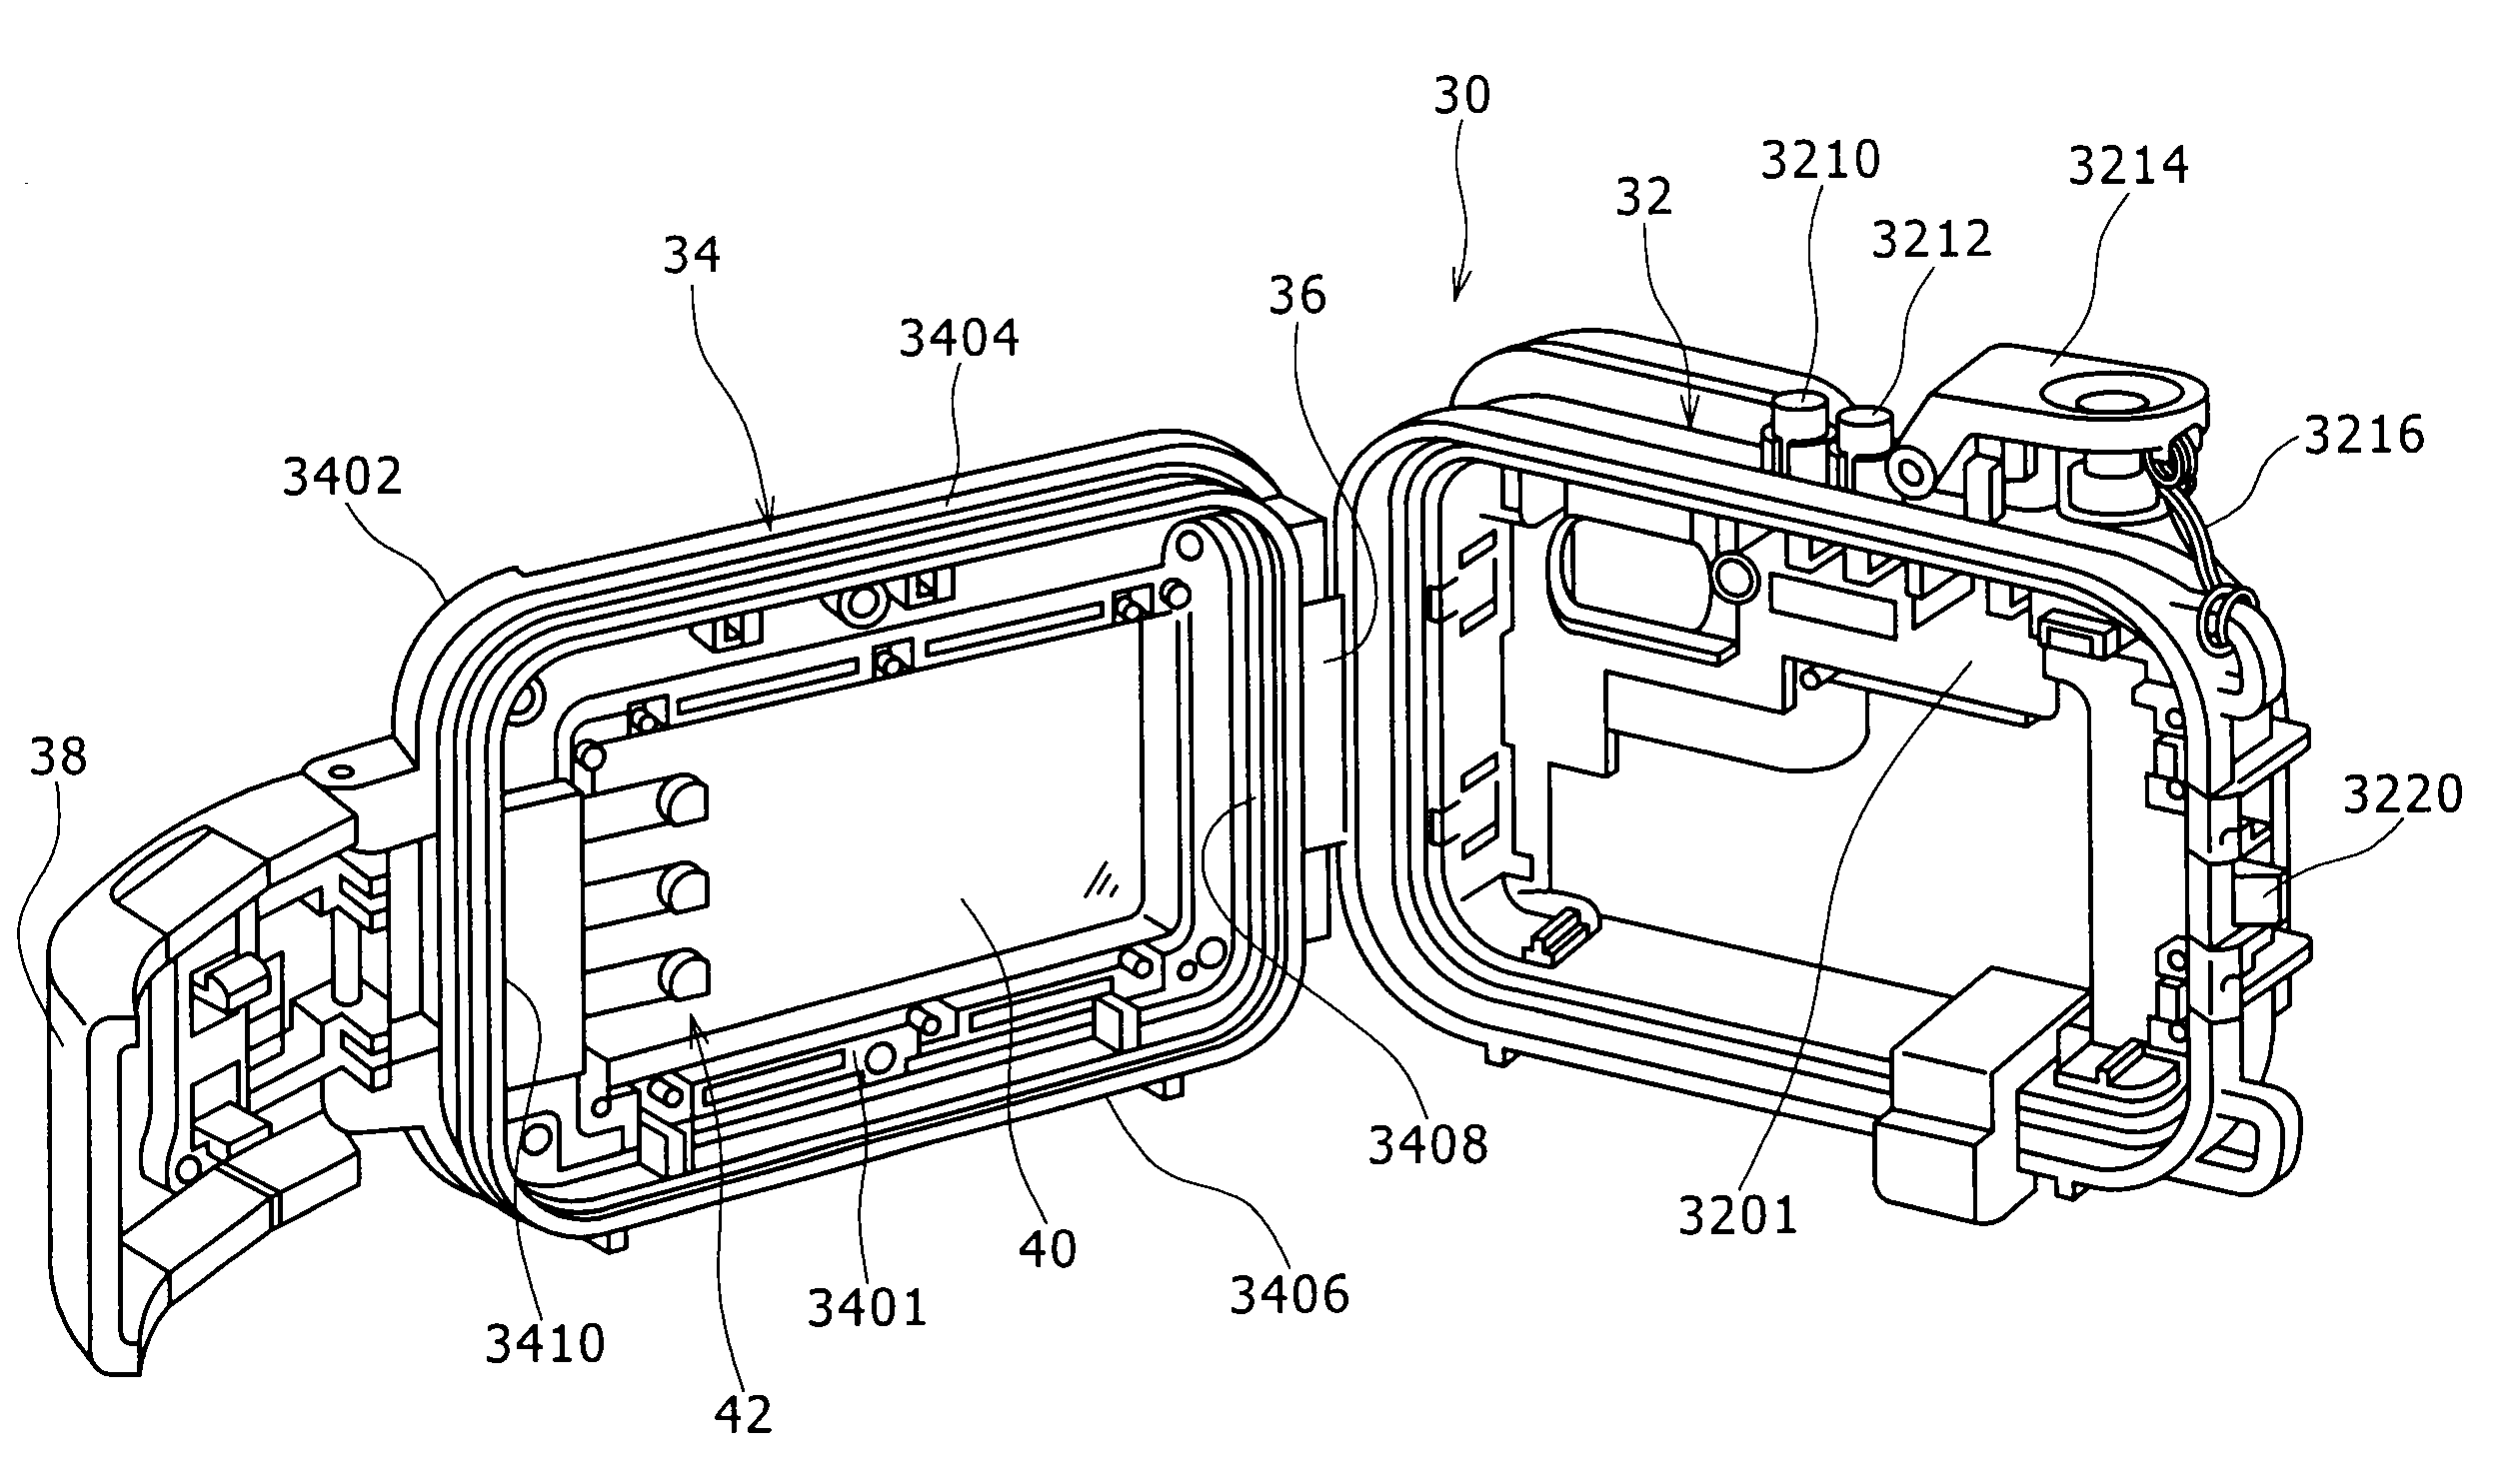 Waterproof case for electronic device